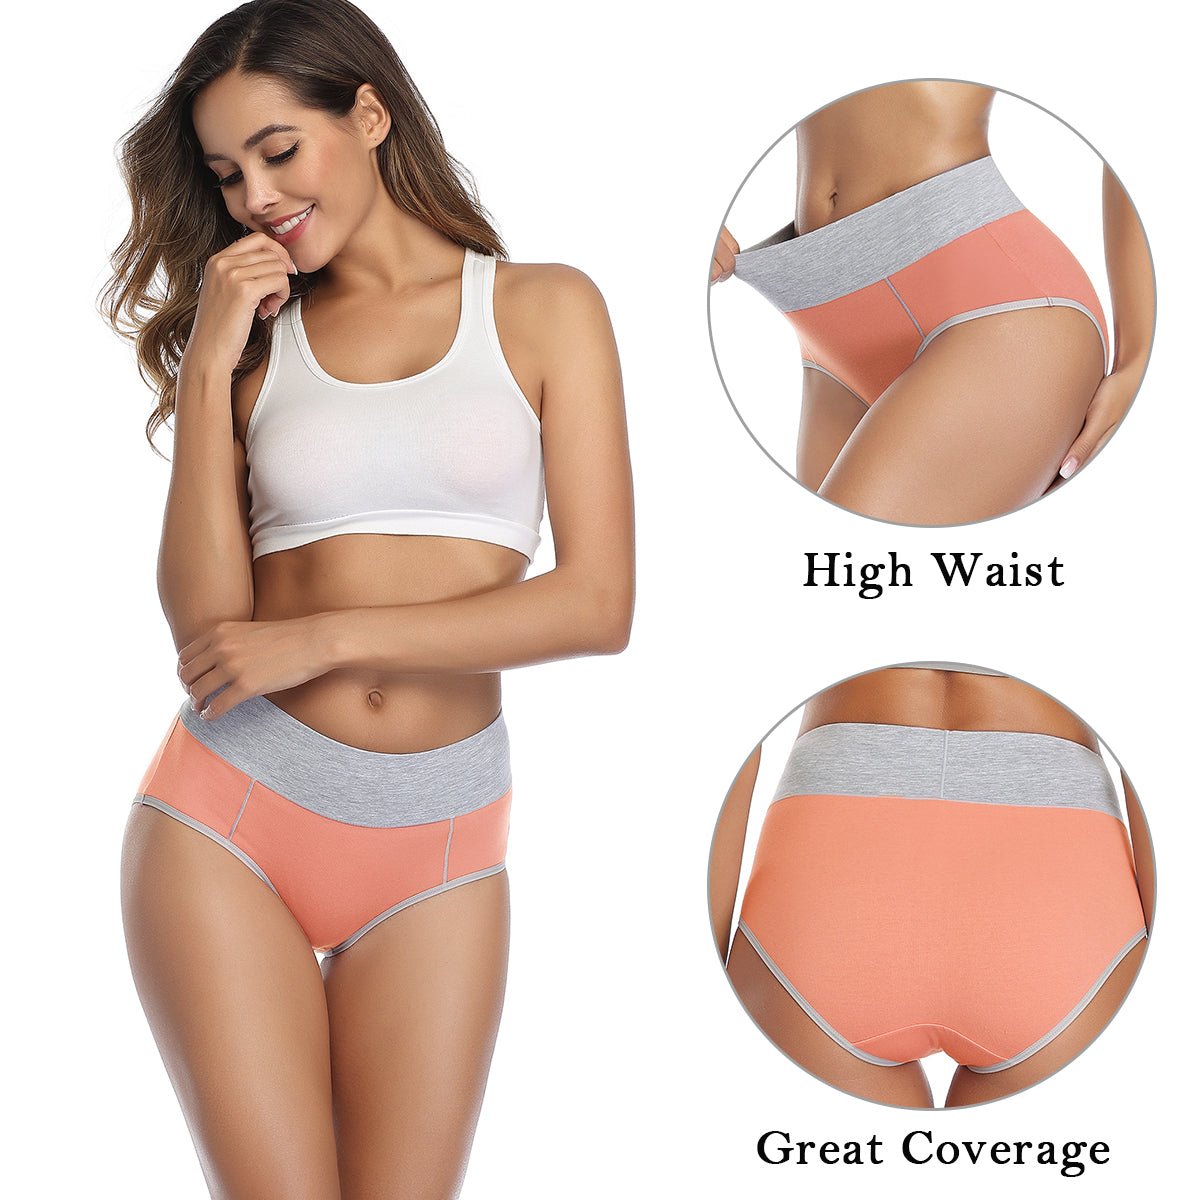  Wirarpa Womens Soft Cotton Underwear Briefs Breathable 5  Pack High Waist Full Coverage Multicolor Ladies Panties Large